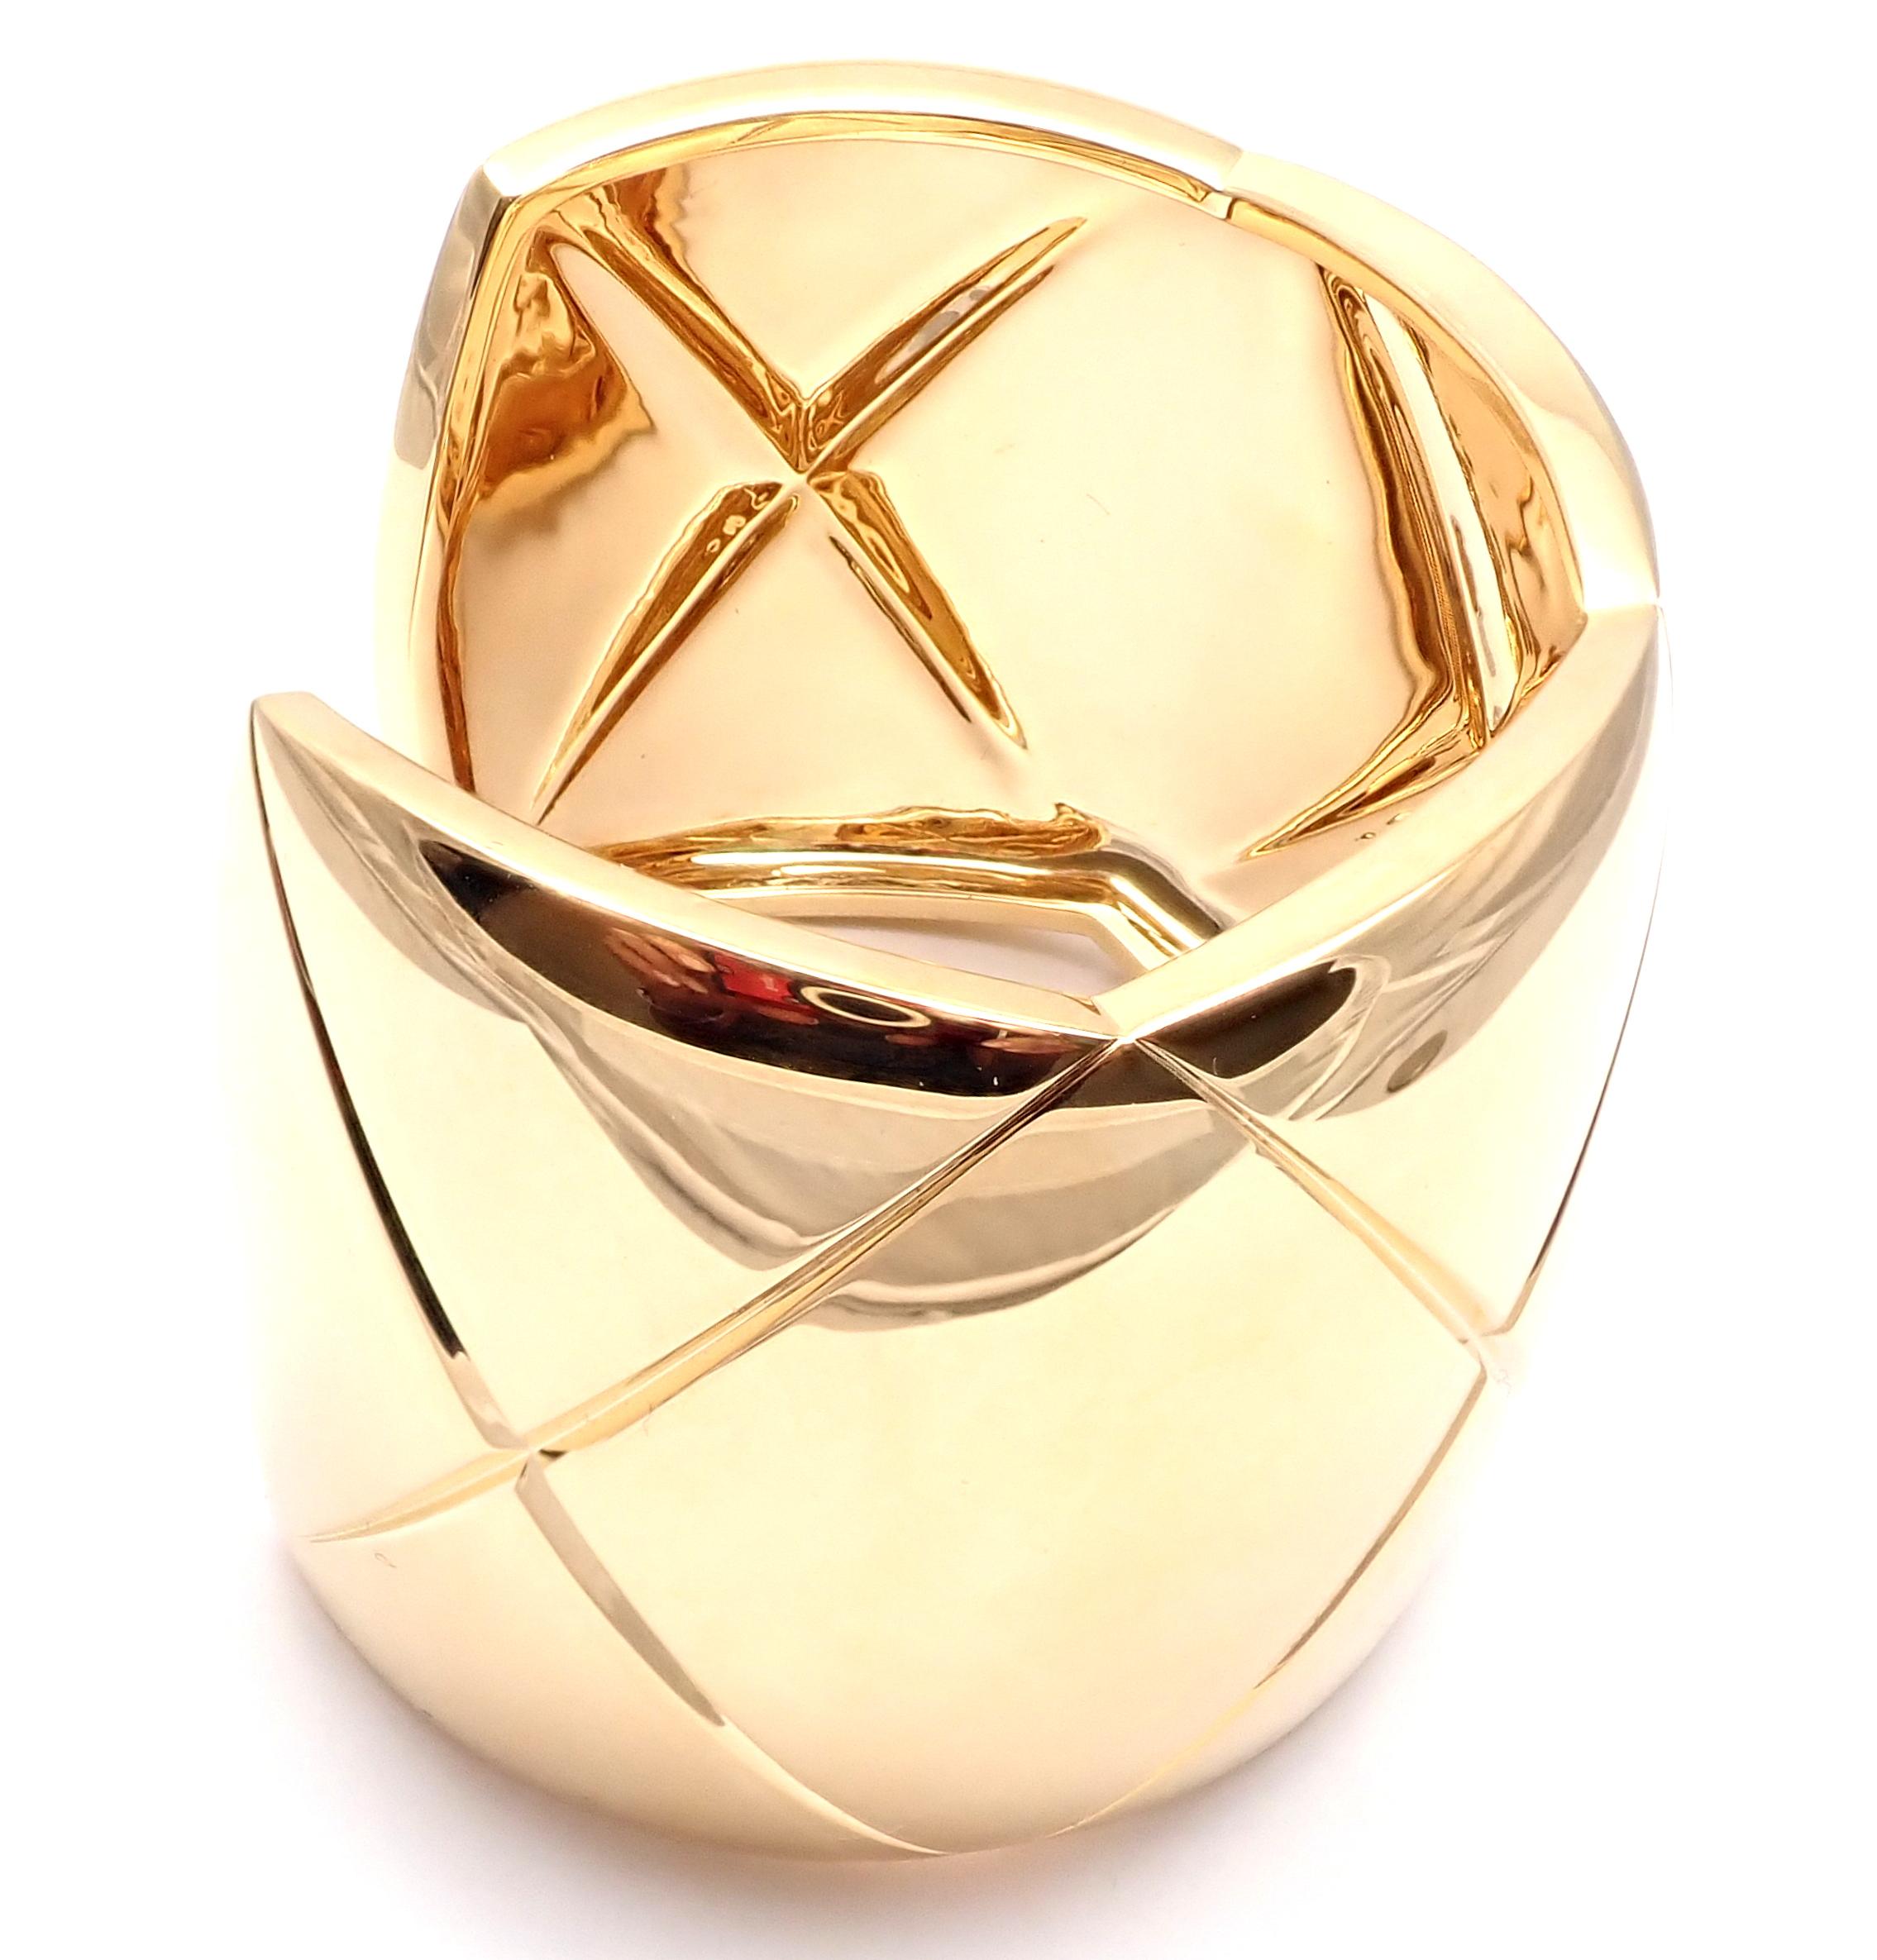 Chanel Coco Crush Yellow Gold Cuff Bangle Bracelet For Sale 2